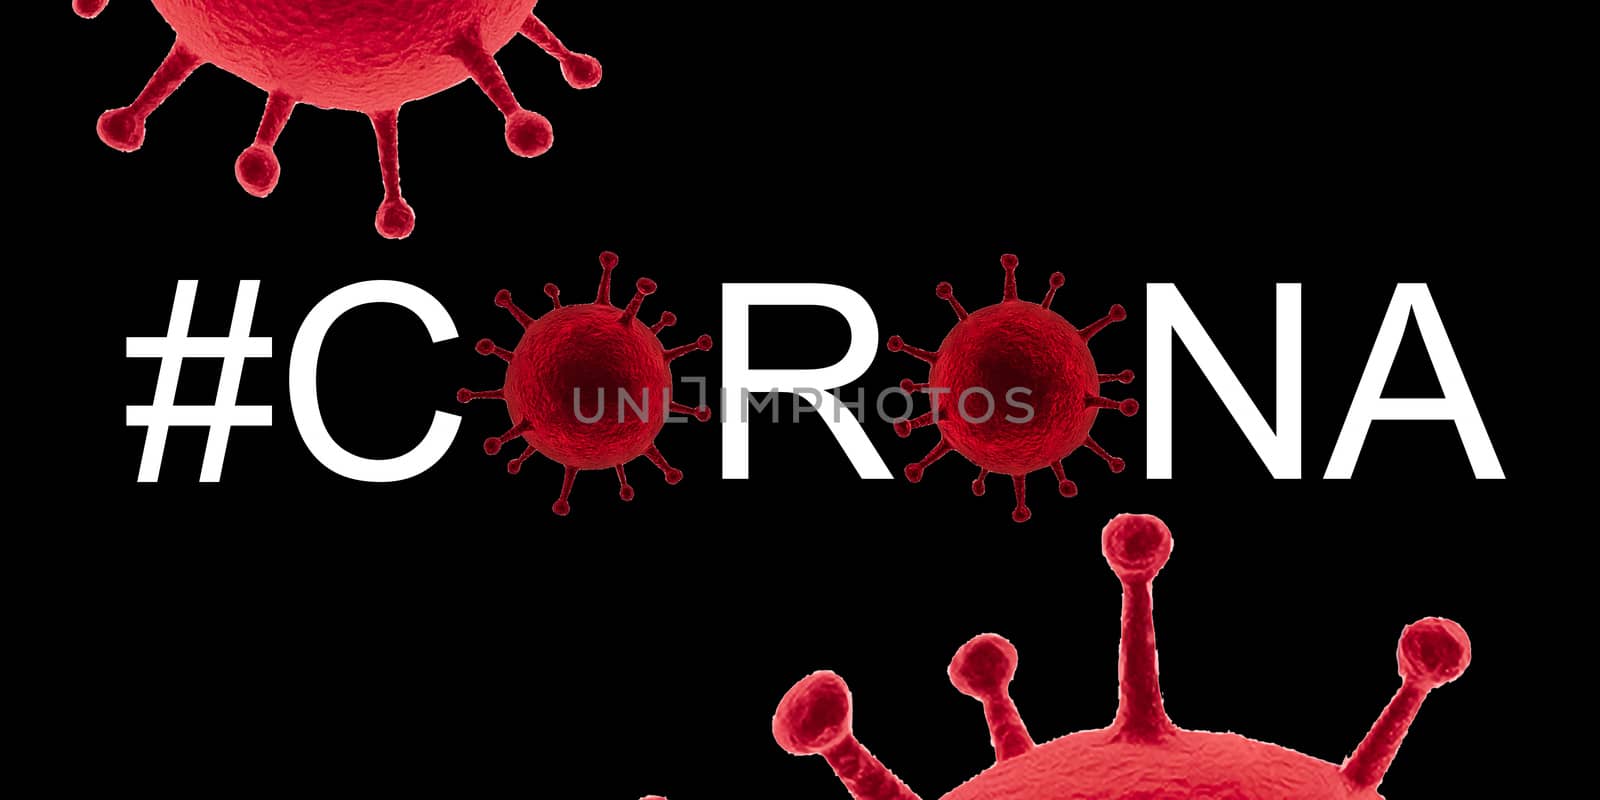 Chalkboard banner of corona virus tags in different colors.